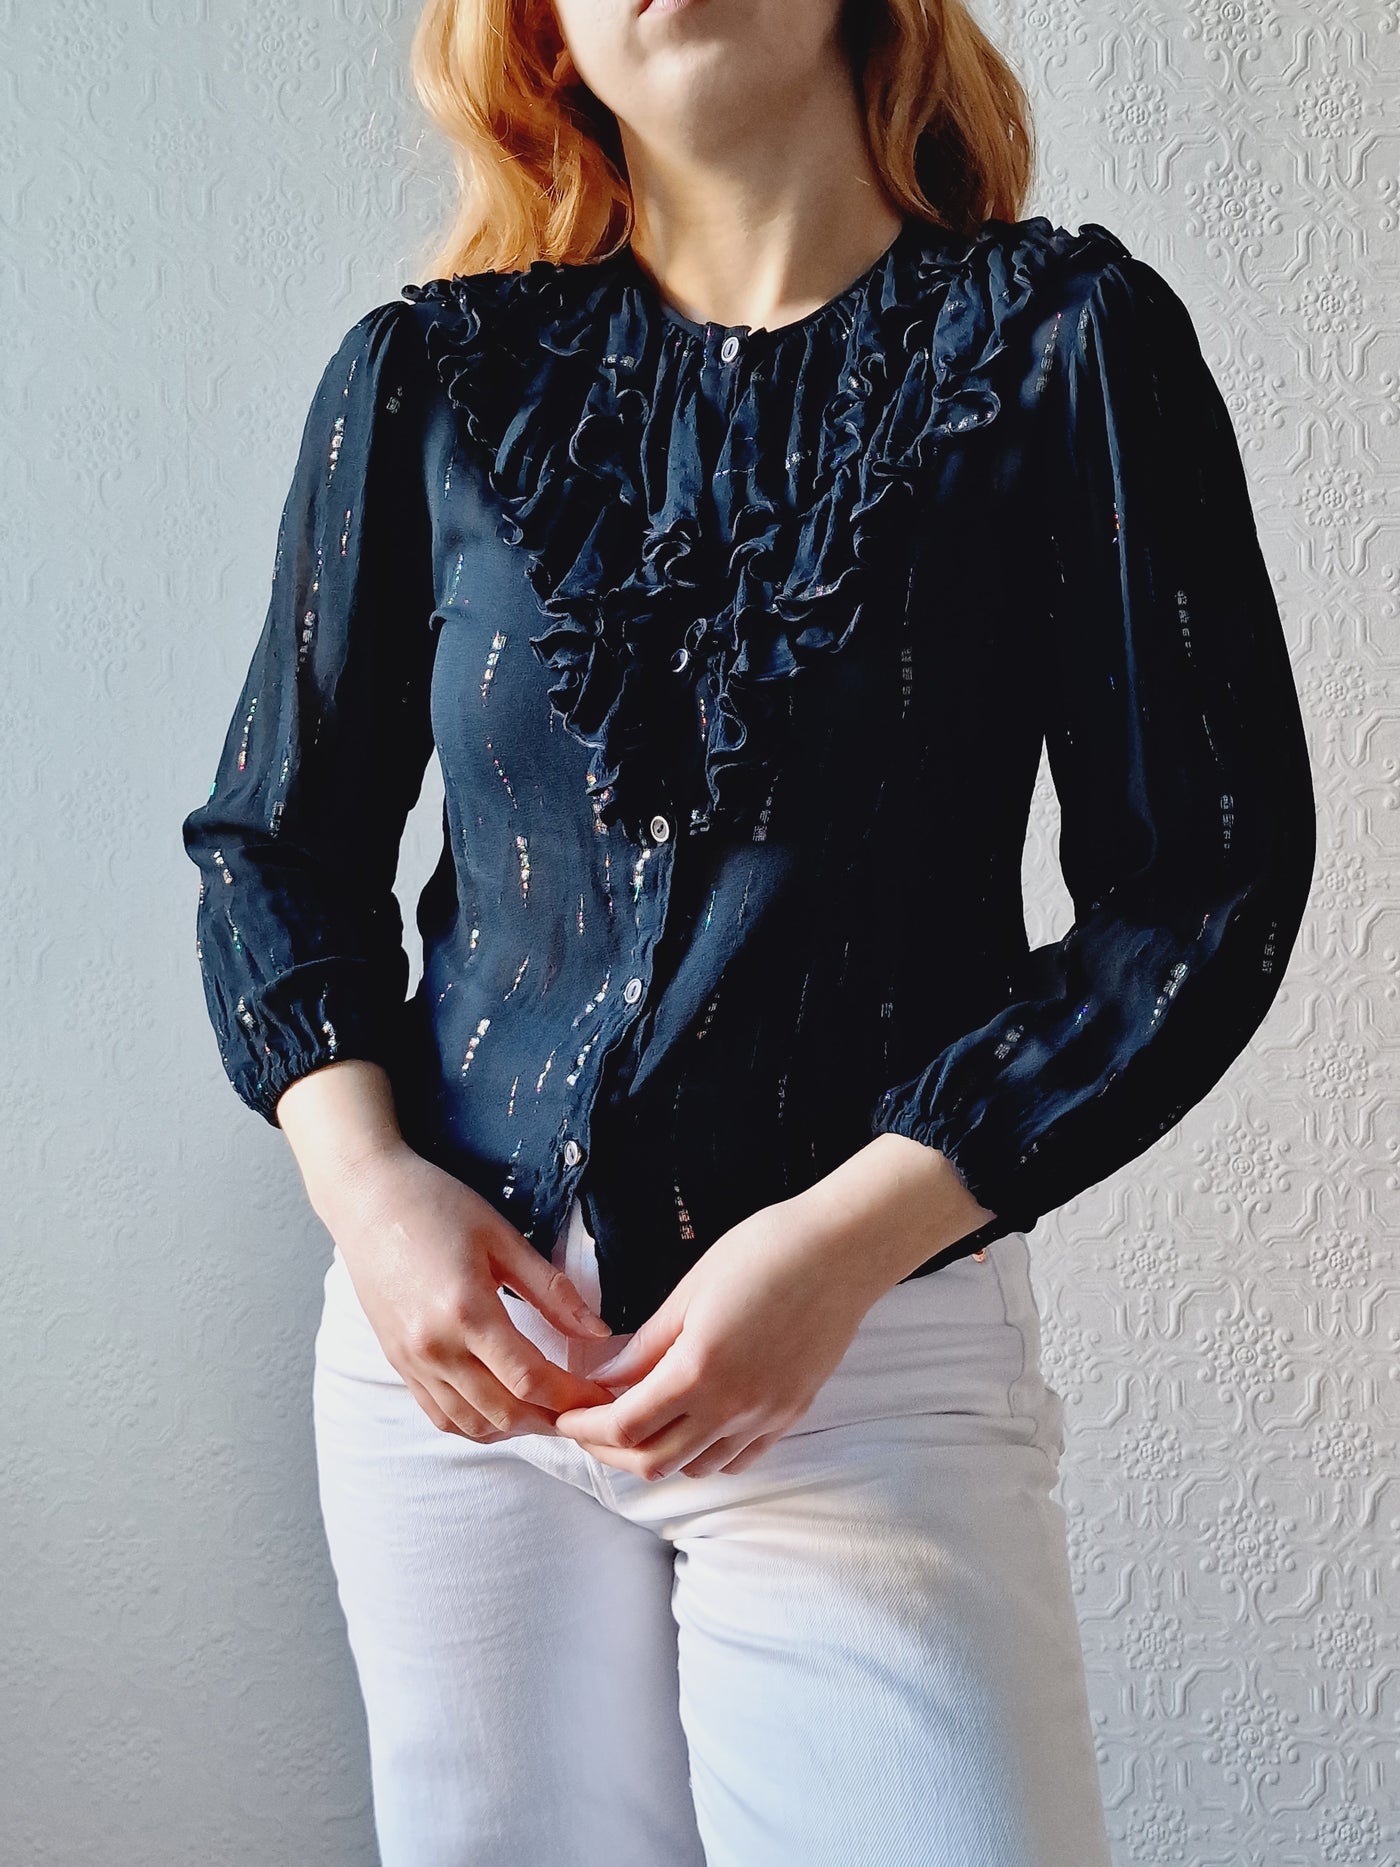 Vintage 80s Sheer Black 3/4 Sleeve Blouse with Frilly Collar - XS